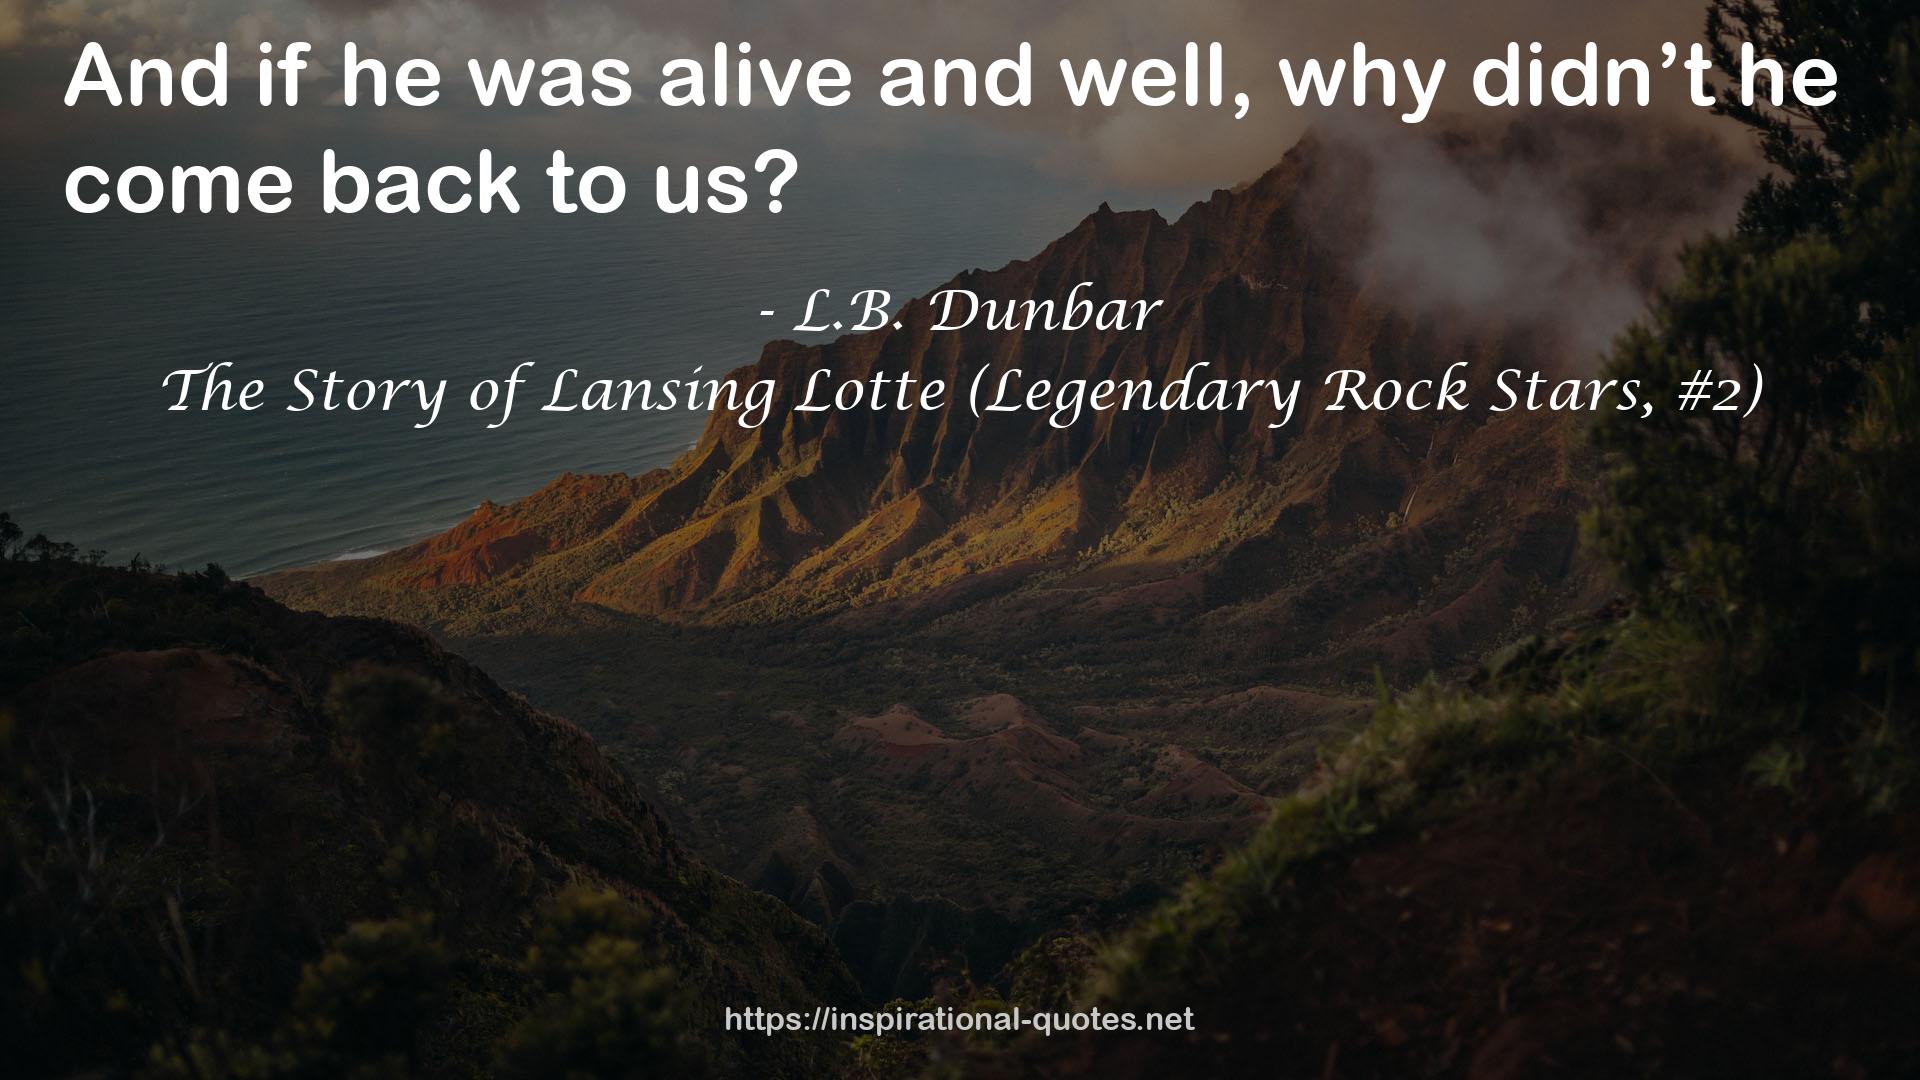 The Story of Lansing Lotte (Legendary Rock Stars, #2) QUOTES